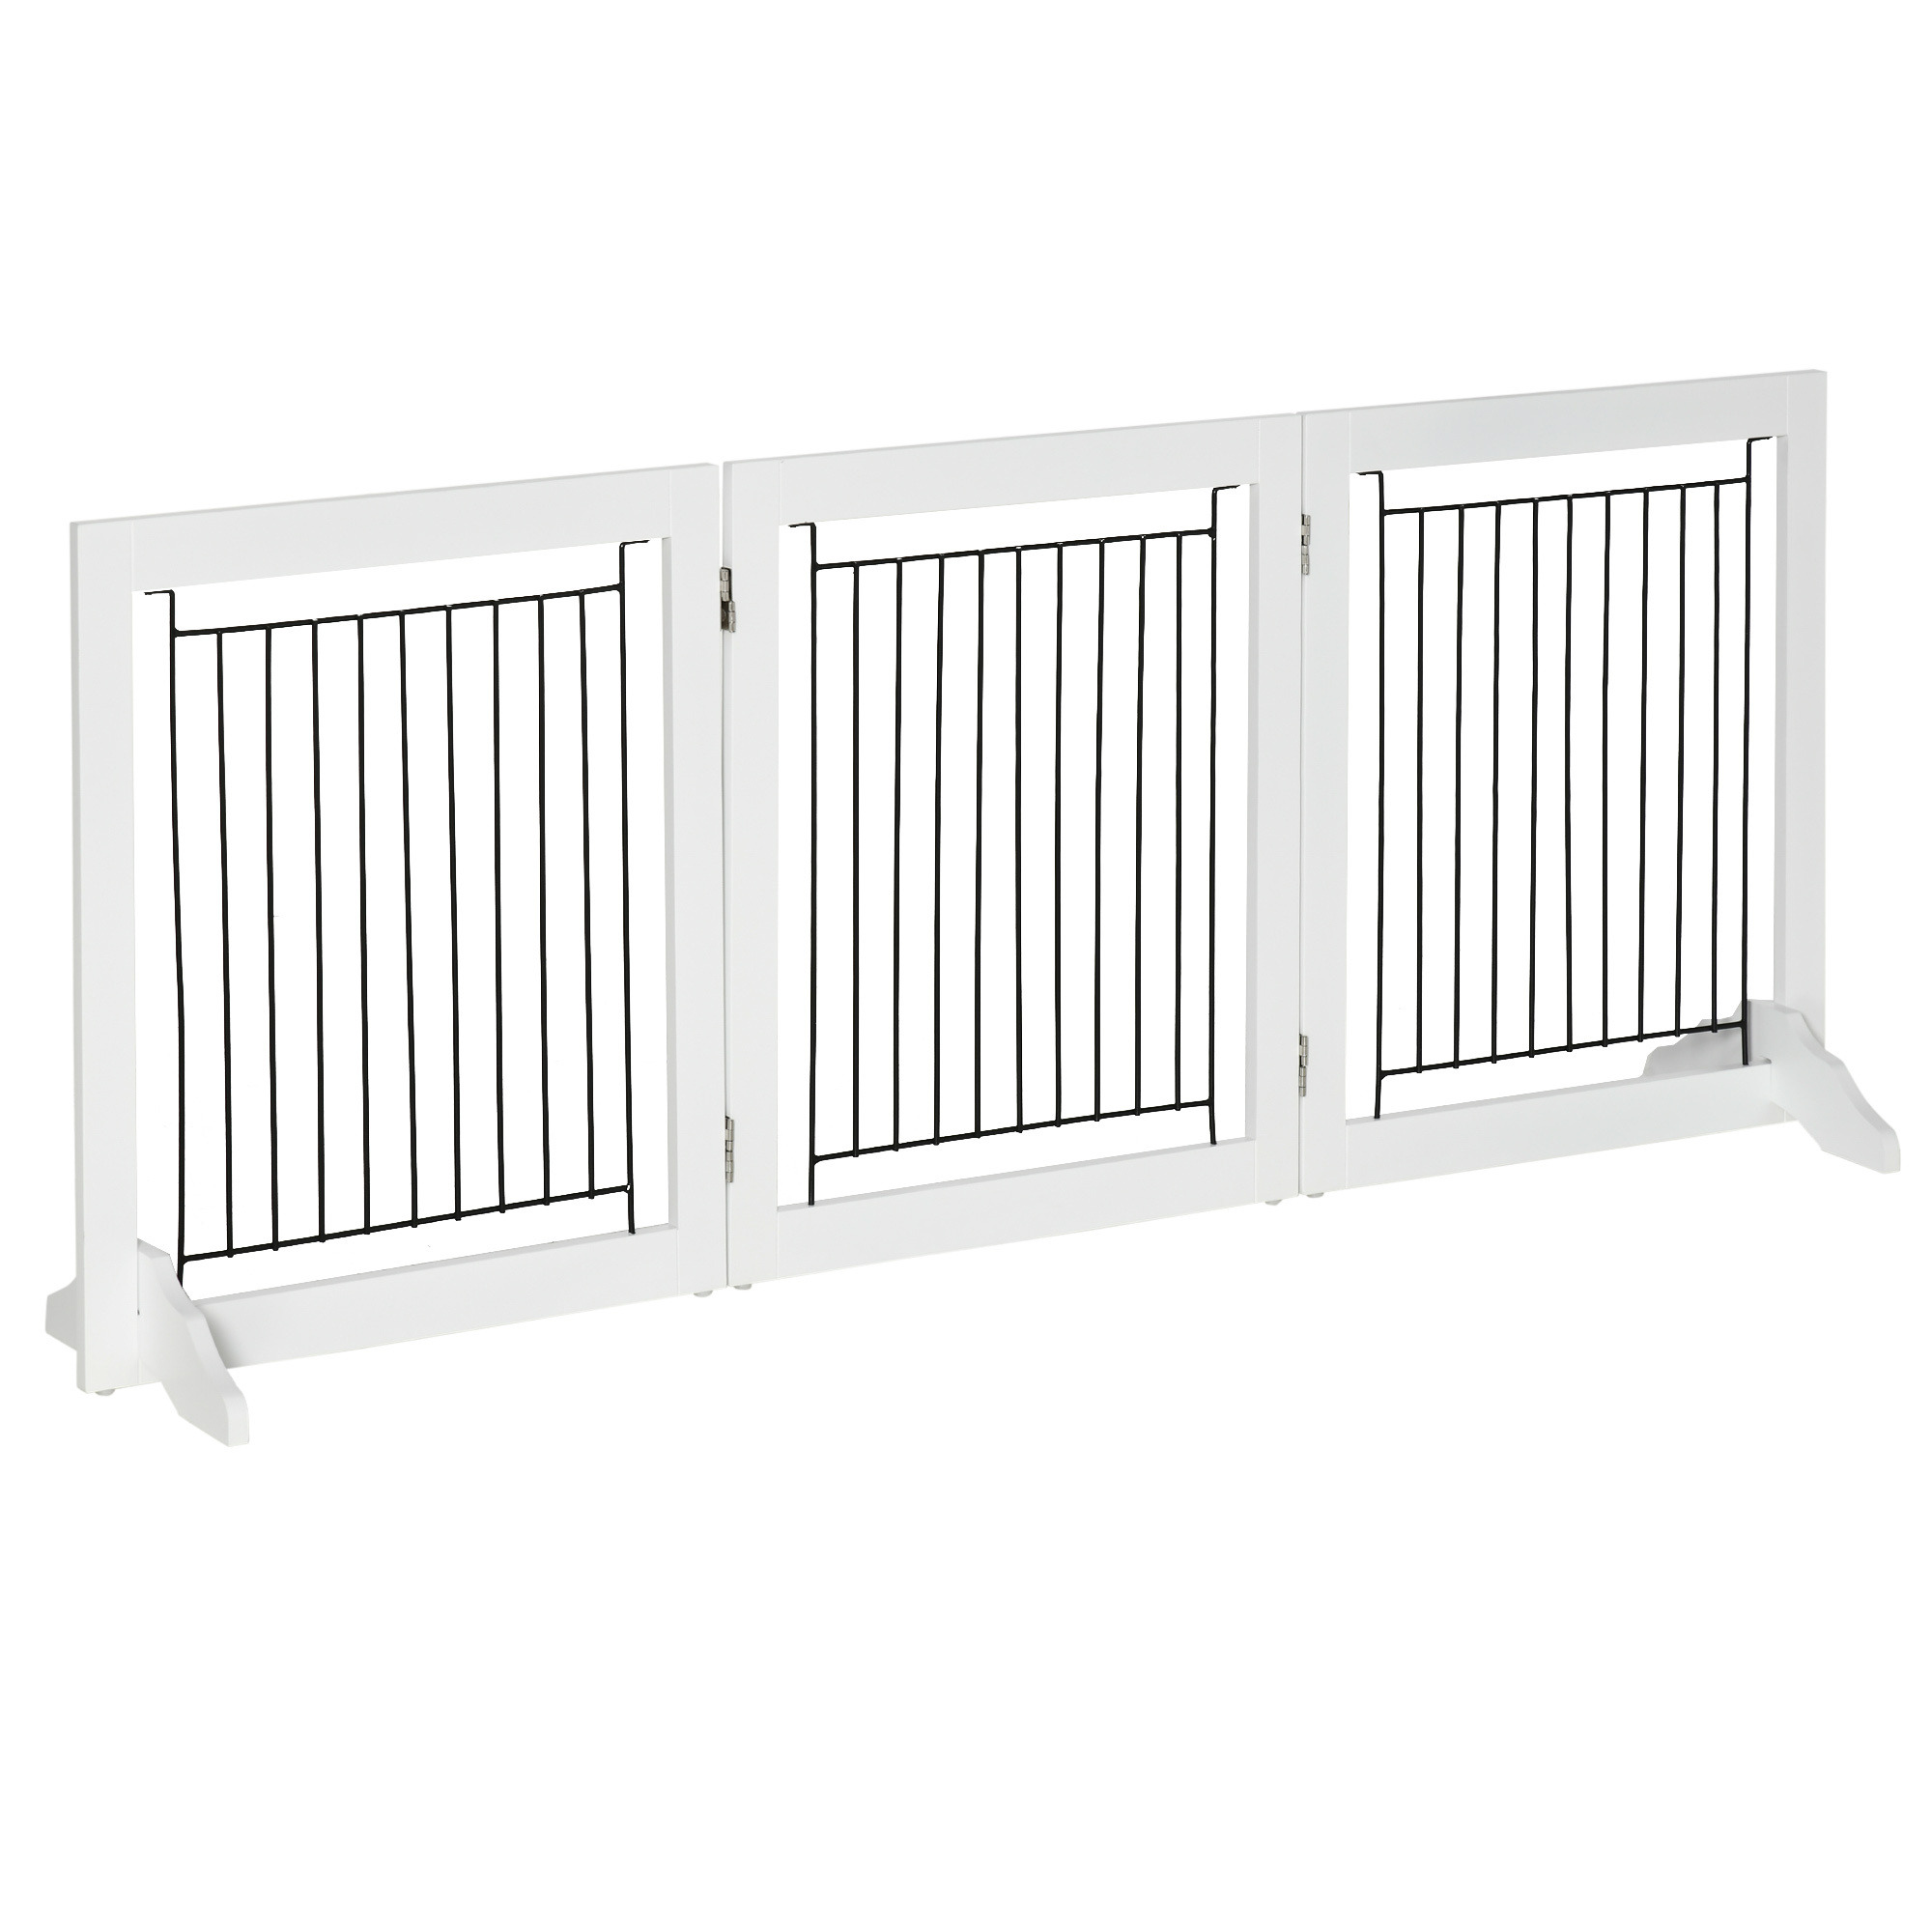 PawHut Dog Gate, Freestanding Pet Gate, Wooden Puppy Fence Foldable Design with 61 cm Height 3 Panels, 2 Support Feet, for House Doorway Stairs White